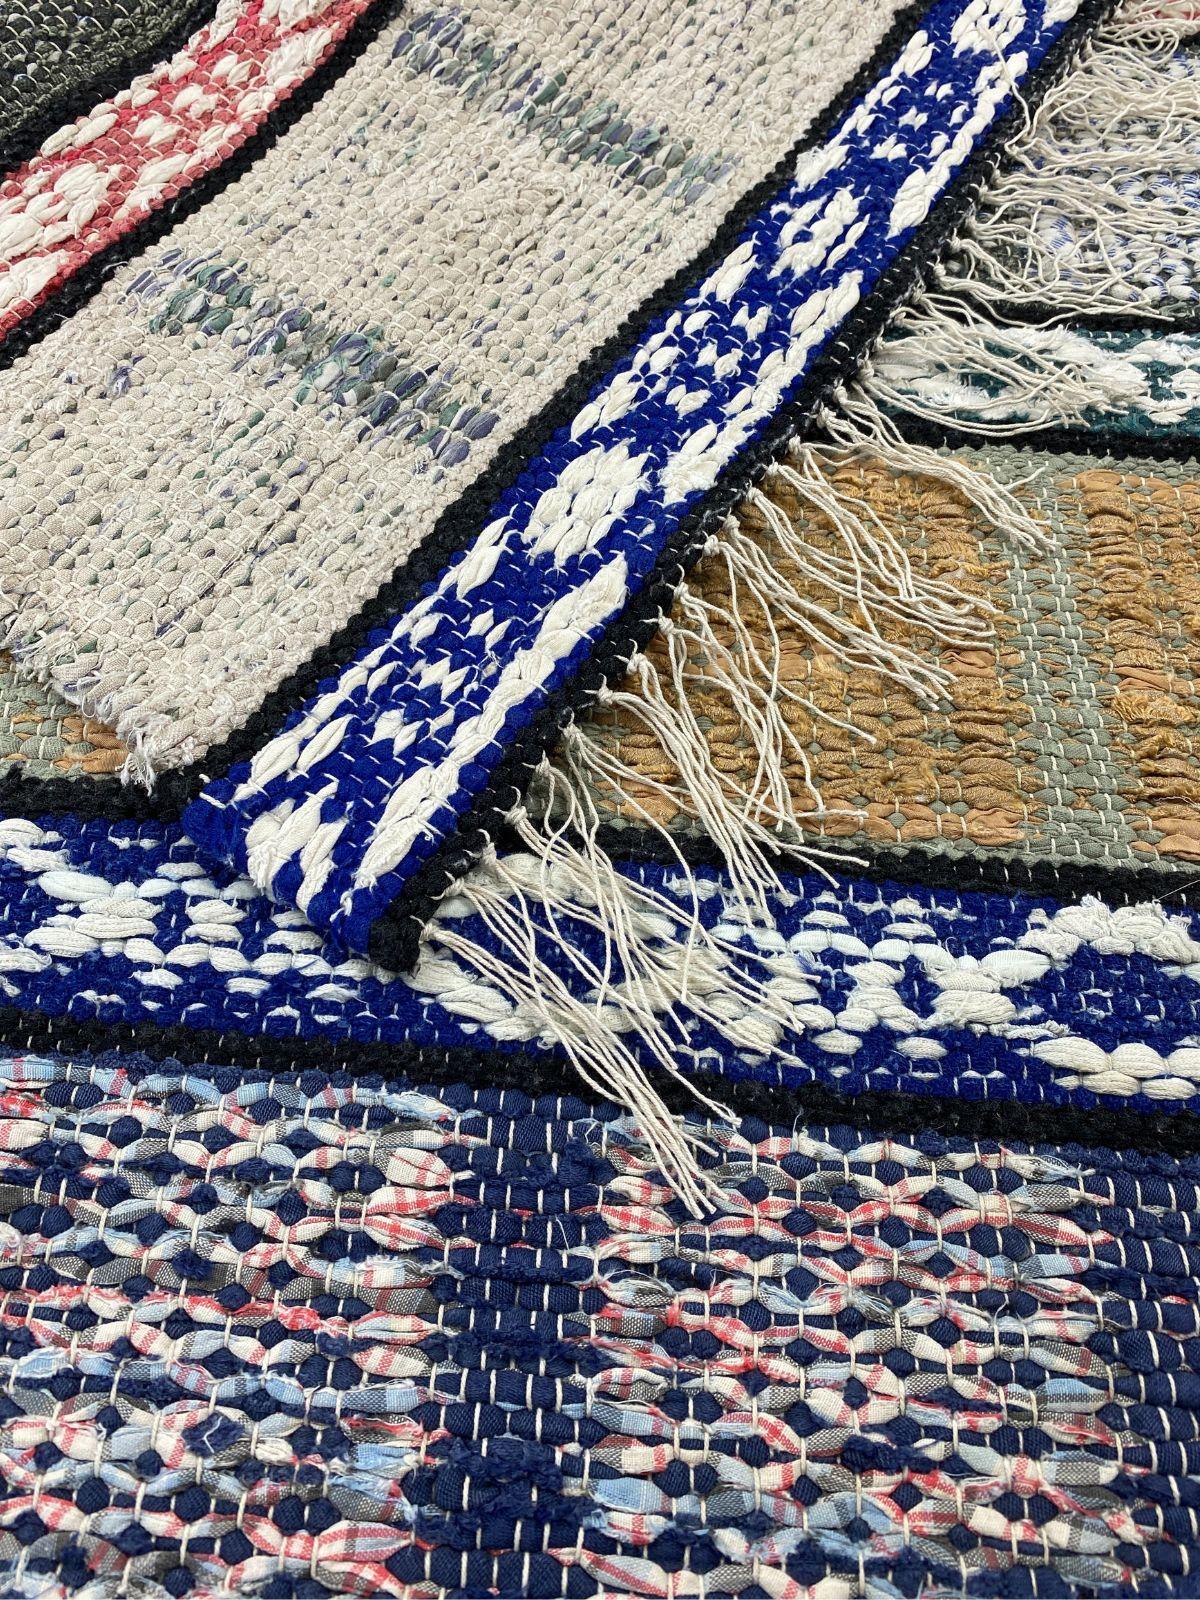 A fantastic Swedish rag rug, woven by hand in the late 1960´s in Himmelsberga Öland, Sweden. Woven by Eddy Jonasson. Eddy was born in 1926 and wove a lot of beautiful rag rugs on demand during her life. This piece of handcrafted art is from the late